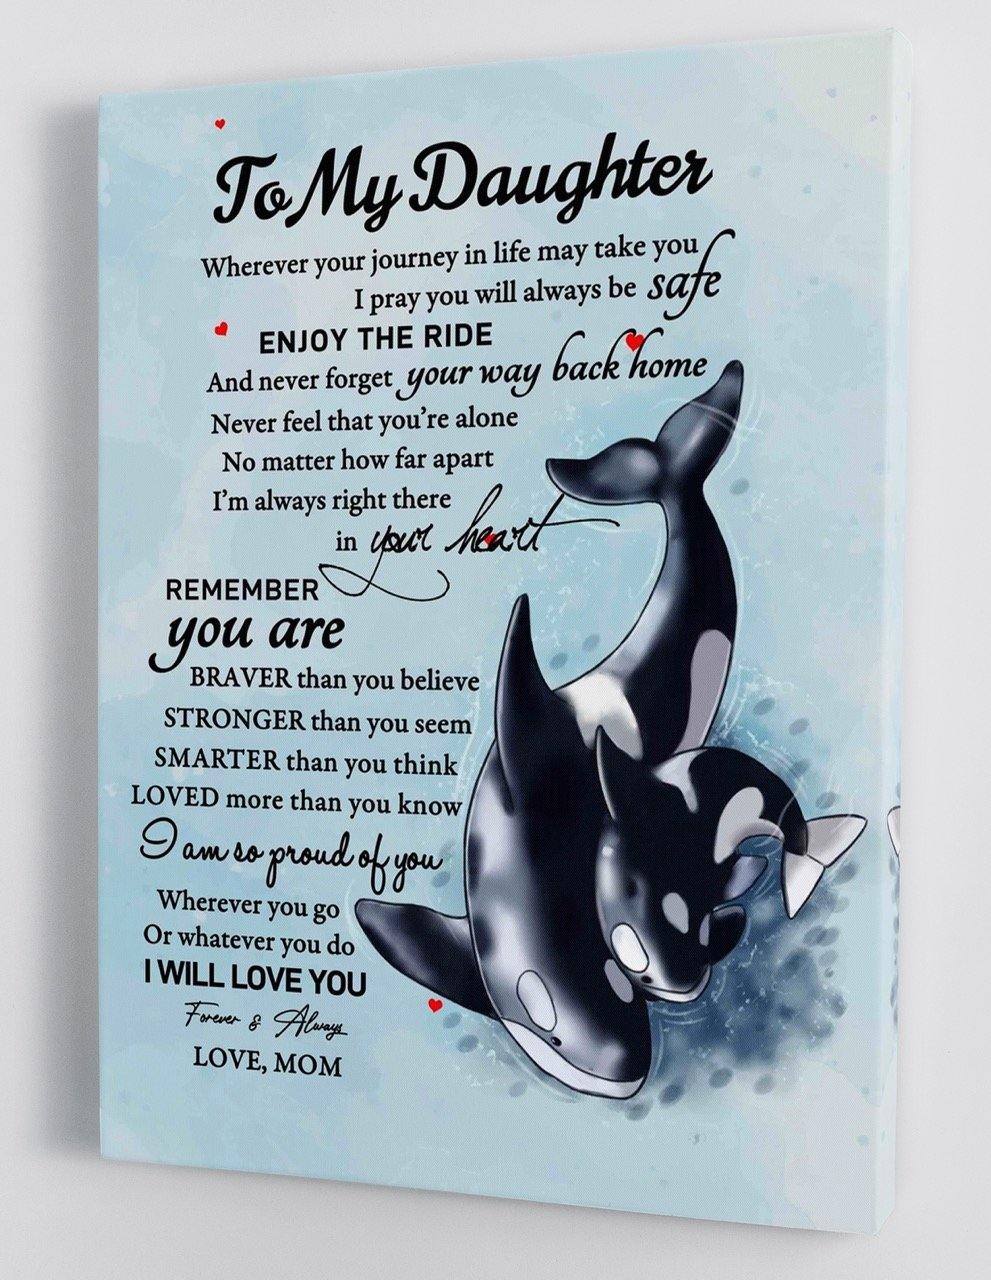 To My Daughter - From Mom - Framed Canvas Gift MD037 - DivesArt LLC